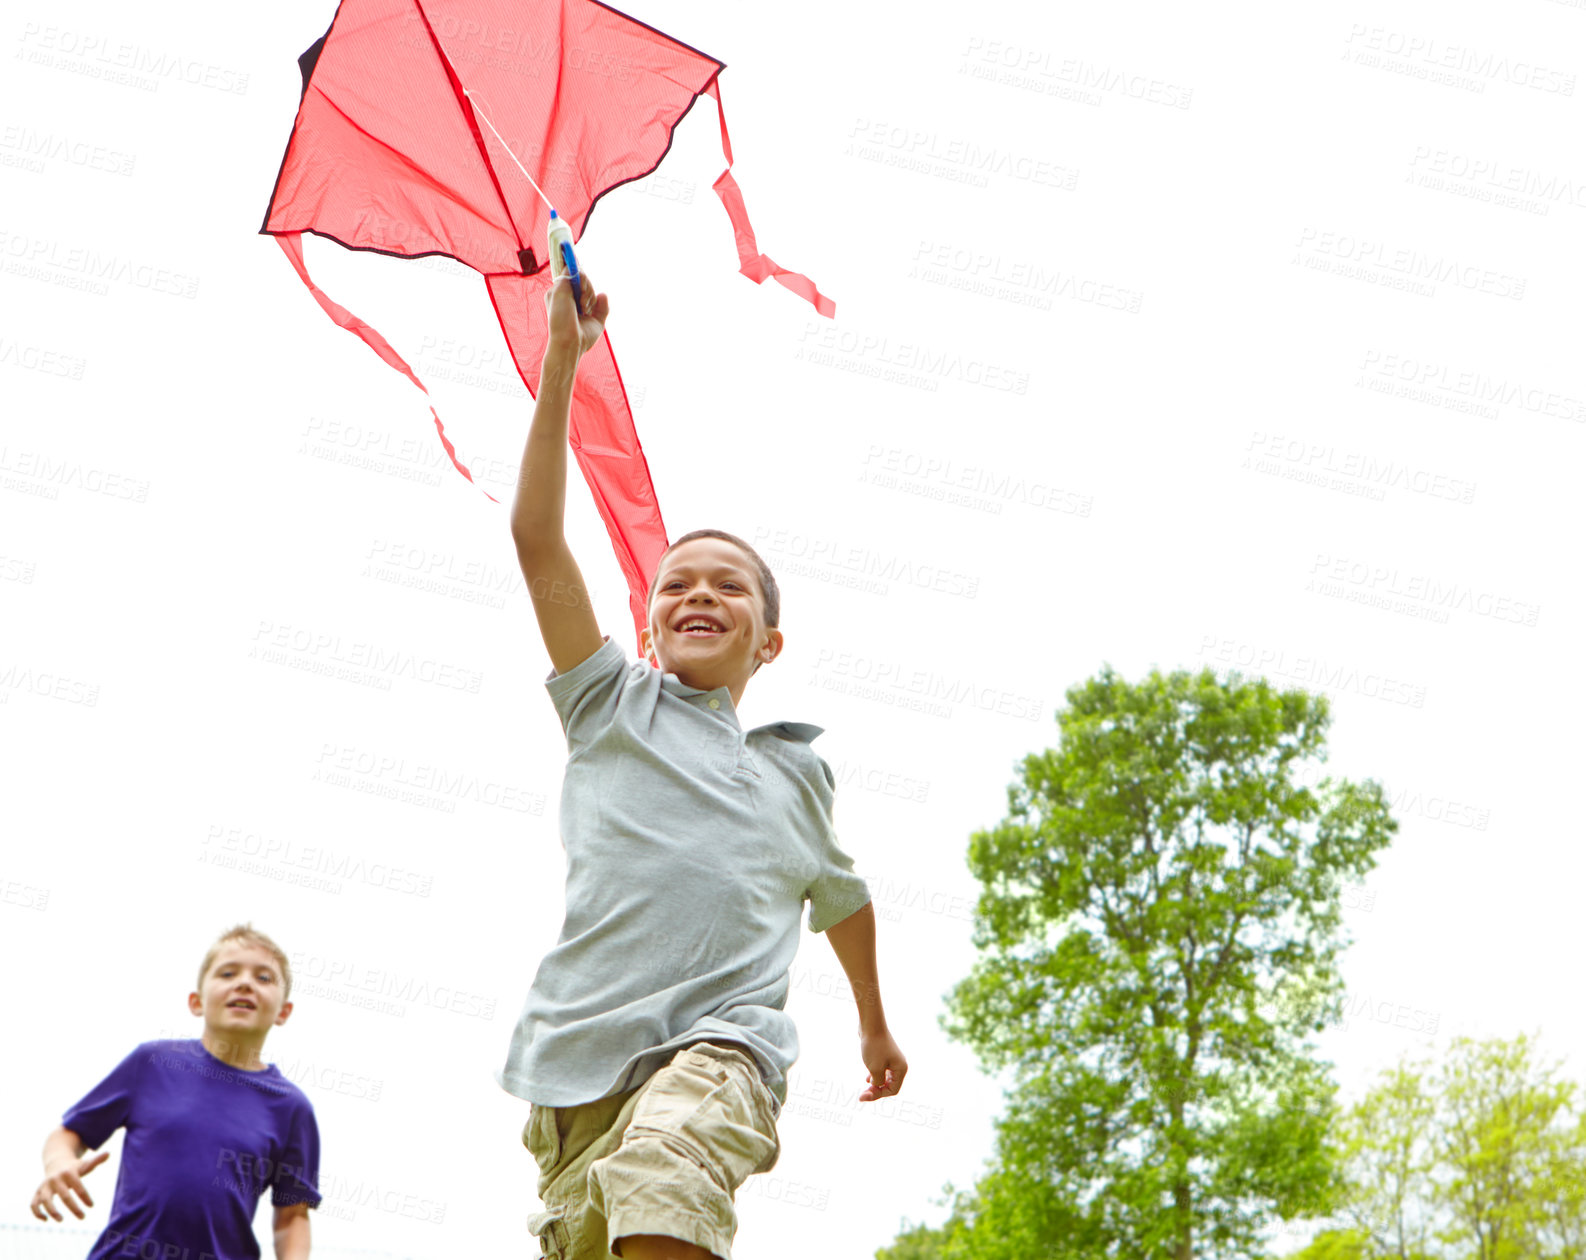 Buy stock photo A happy young boy flying a kite outside in a park